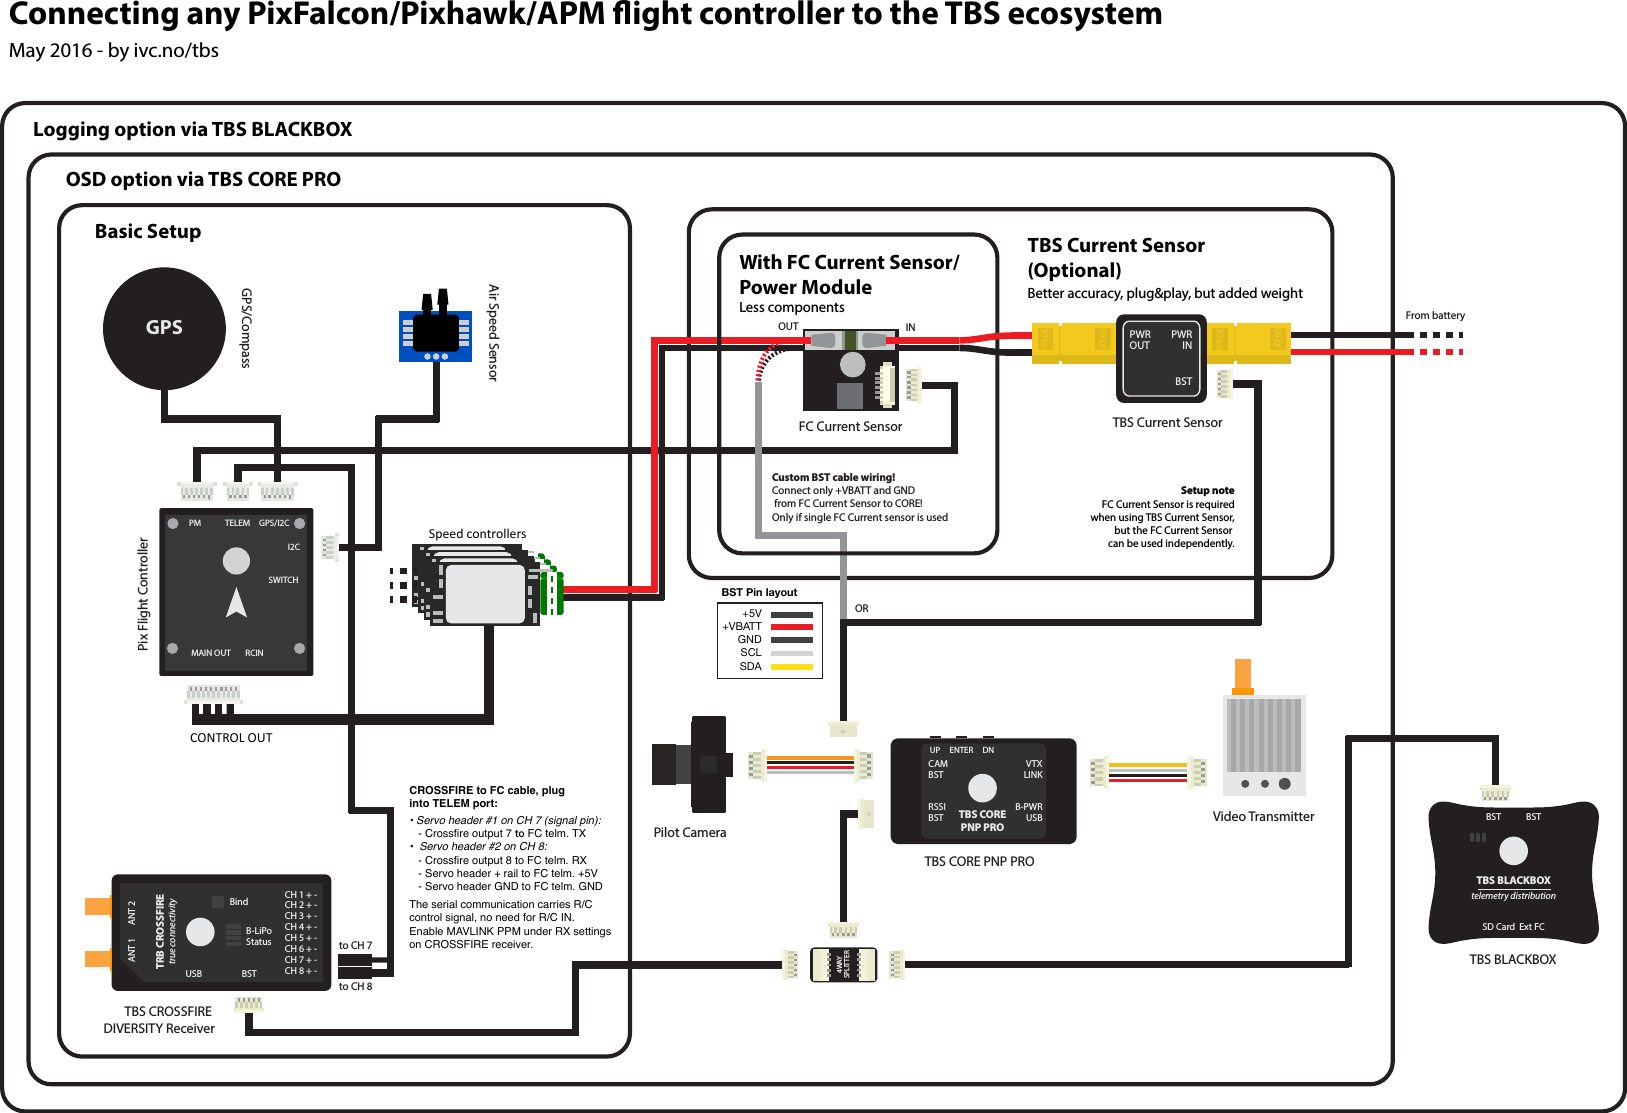 XT60Connecting any PixFalcon/Pixhawk/APM �ight controller to the TBS ecosystemTBS Current SensorXT60XT60PWRINBSTPWROUTPilot CameraVideo TransmitterFrom batteryTBS CORE PNP PRO TBS COREPNP PROCAMBSTRSSIBSTVTXLINKB-PWRUSBUP     ENTER     DNXT60May 2016 - by ivc.no/tbsGPS/CompassGPSBST            BSTTBS BLACKBOXSD Card  Ext FCtelemetry distributionTBS BLACKBOXCH 1 + -CH 2 + -CH 3 + -CH 4 + -CH 5 + -CH 6 + -CH 7 + -CH 8 + -ANT 1      ANT 2TRB CROSSFIREtrue connectivityBindB-LiPoStatusUSB                   BSTTBS CROSSFIRE DIVERSITY Receiverto CH 7to CH 8SpeedcontrollersCONTROLOUTOSD option via TBS CORE PROLogging option via TBS BLACKBOXBasic SetupCROSSFIRE to FC cable, plug into TELEM port: • Servo header #1 on CH 7 (signal pin):   - Crossfire output 7 to FC telm. TX •  Servo header #2 on CH 8:   - Crossfire output 8 to FC telm. RX   - Servo header + rail to FC telm. +5V   - Servo header GND to FC telm. GNDThe serial communication carries R/Ccontrol signal, no need for R/C IN.Enable MAVLINK PPM under RX settingson CROSSFIRE receiver.FC Current SensorCustom BST cable wiring!Connect only +VBATT and GND from FC Current Sensor to CORE!Only if single FC Current sensor is usedAir Speed SensorPix Flight Controller4WAYSPLITTERTBS Current Sensor(Optional)Better accuracy, plug&amp;play, but added weightWith FC Current Sensor/Power ModuleLess componentsSetup noteFC Current Sensor is requiredwhen using TBS Current Sensor,but the FC Current Sensor can be used independently.PM TELEM GPS/I2CI2CSWITCHMAIN OUT RCIN+5V+VBATTGNDSCLSDABSTPinlayoutINOUTOR